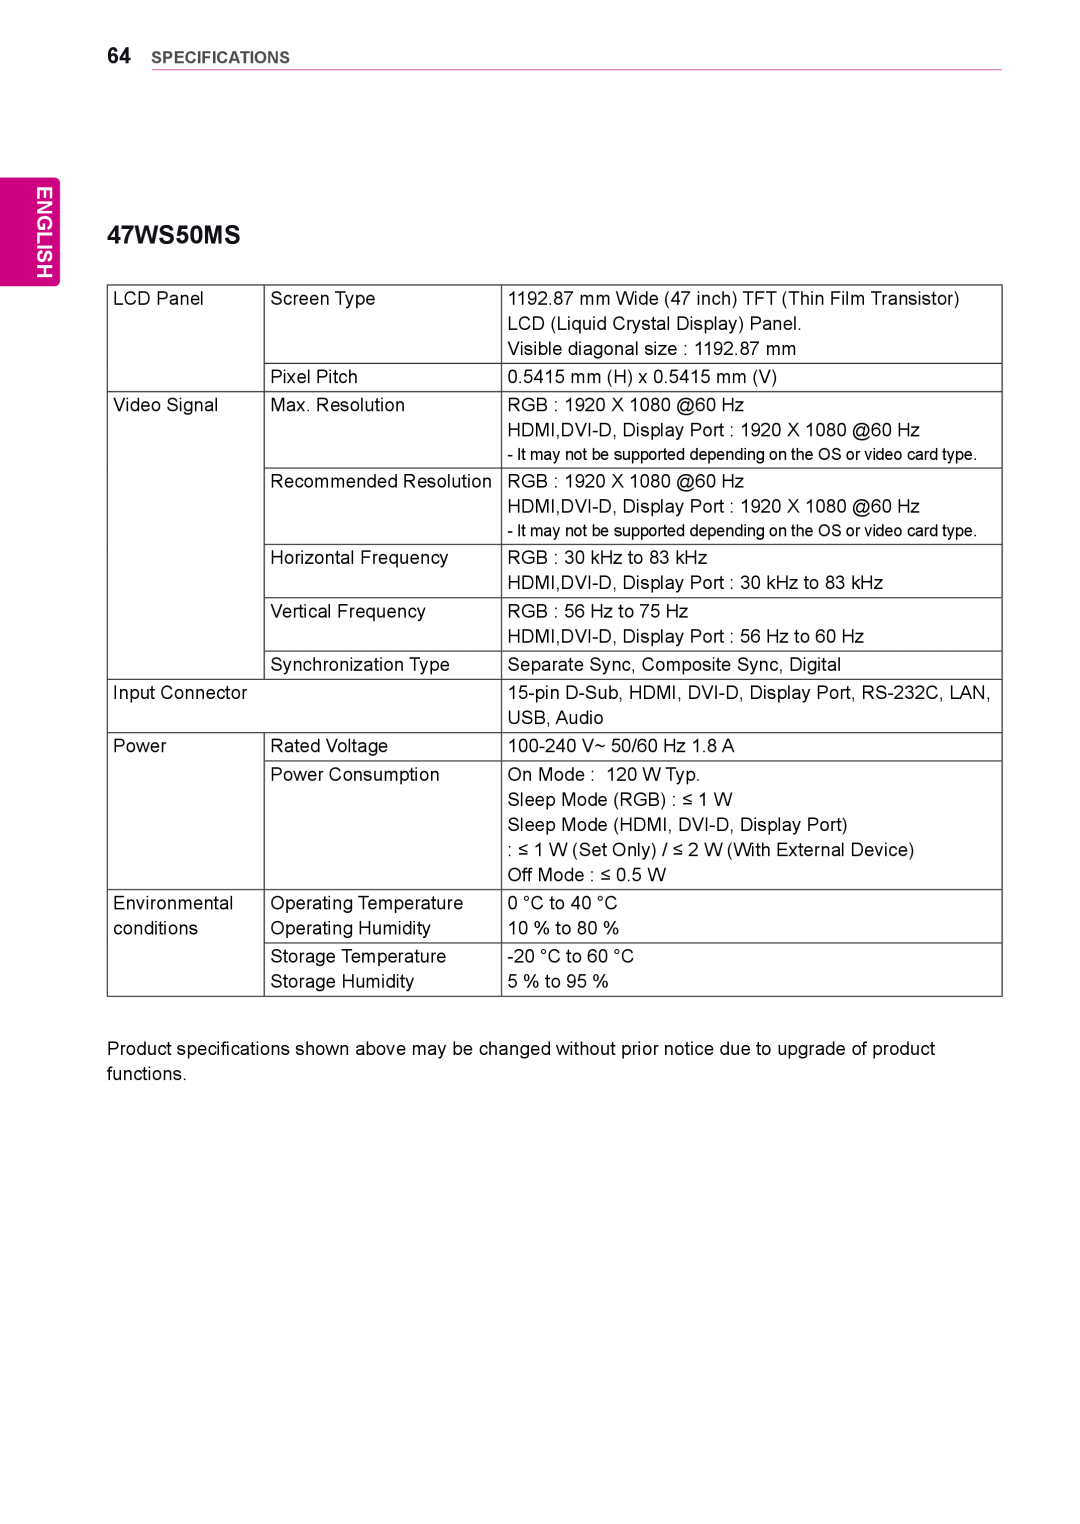 LG Electronics 42WS50MS owner manual 47WS50MS, English, Specifications 